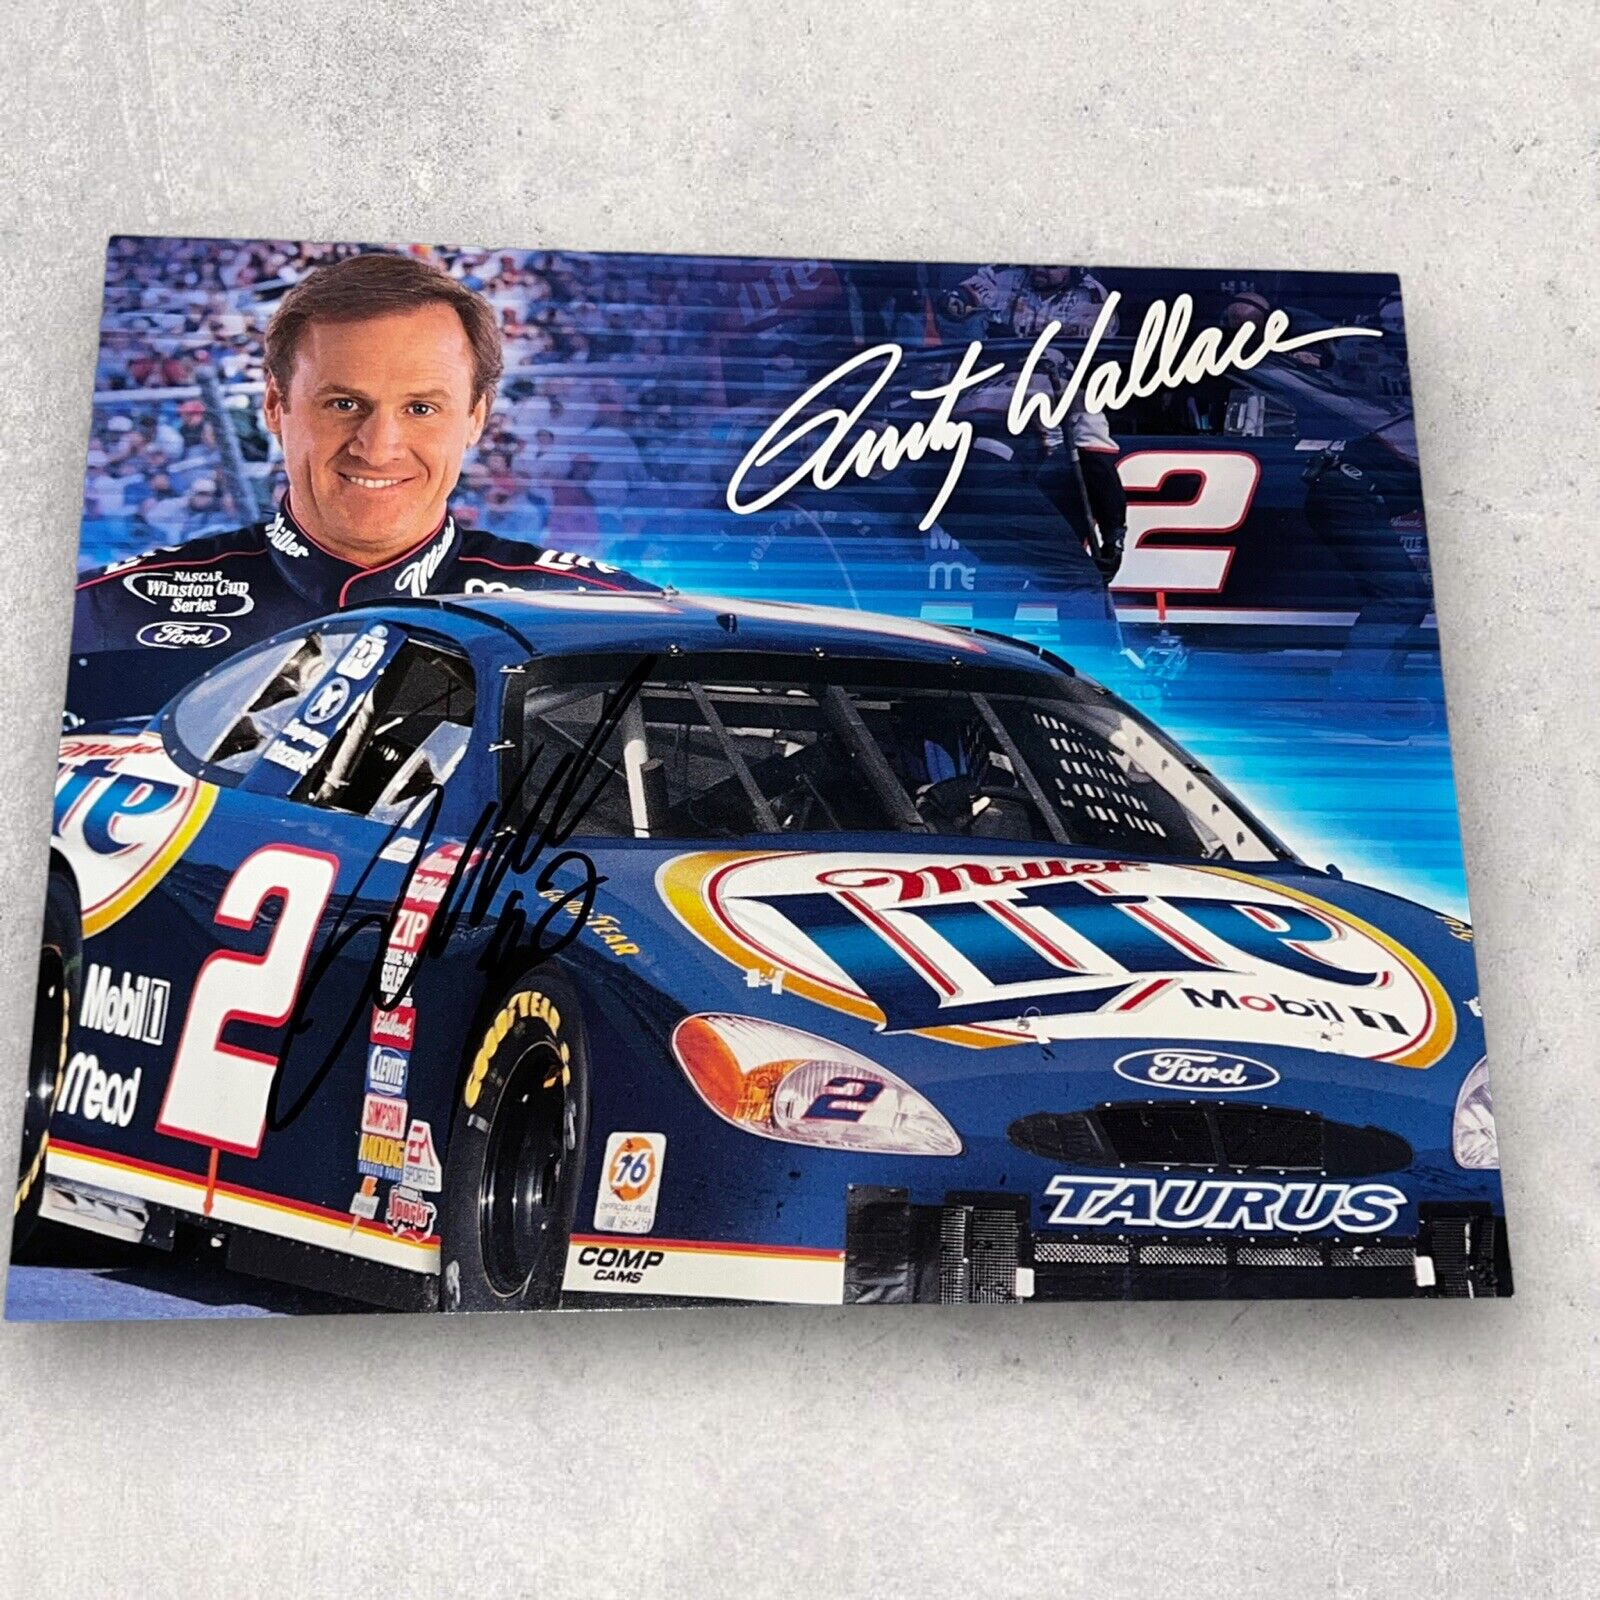 Rusty Wallace Miller Lite Ford #2 Blue Duece  Autographed Nascar Racing Photo